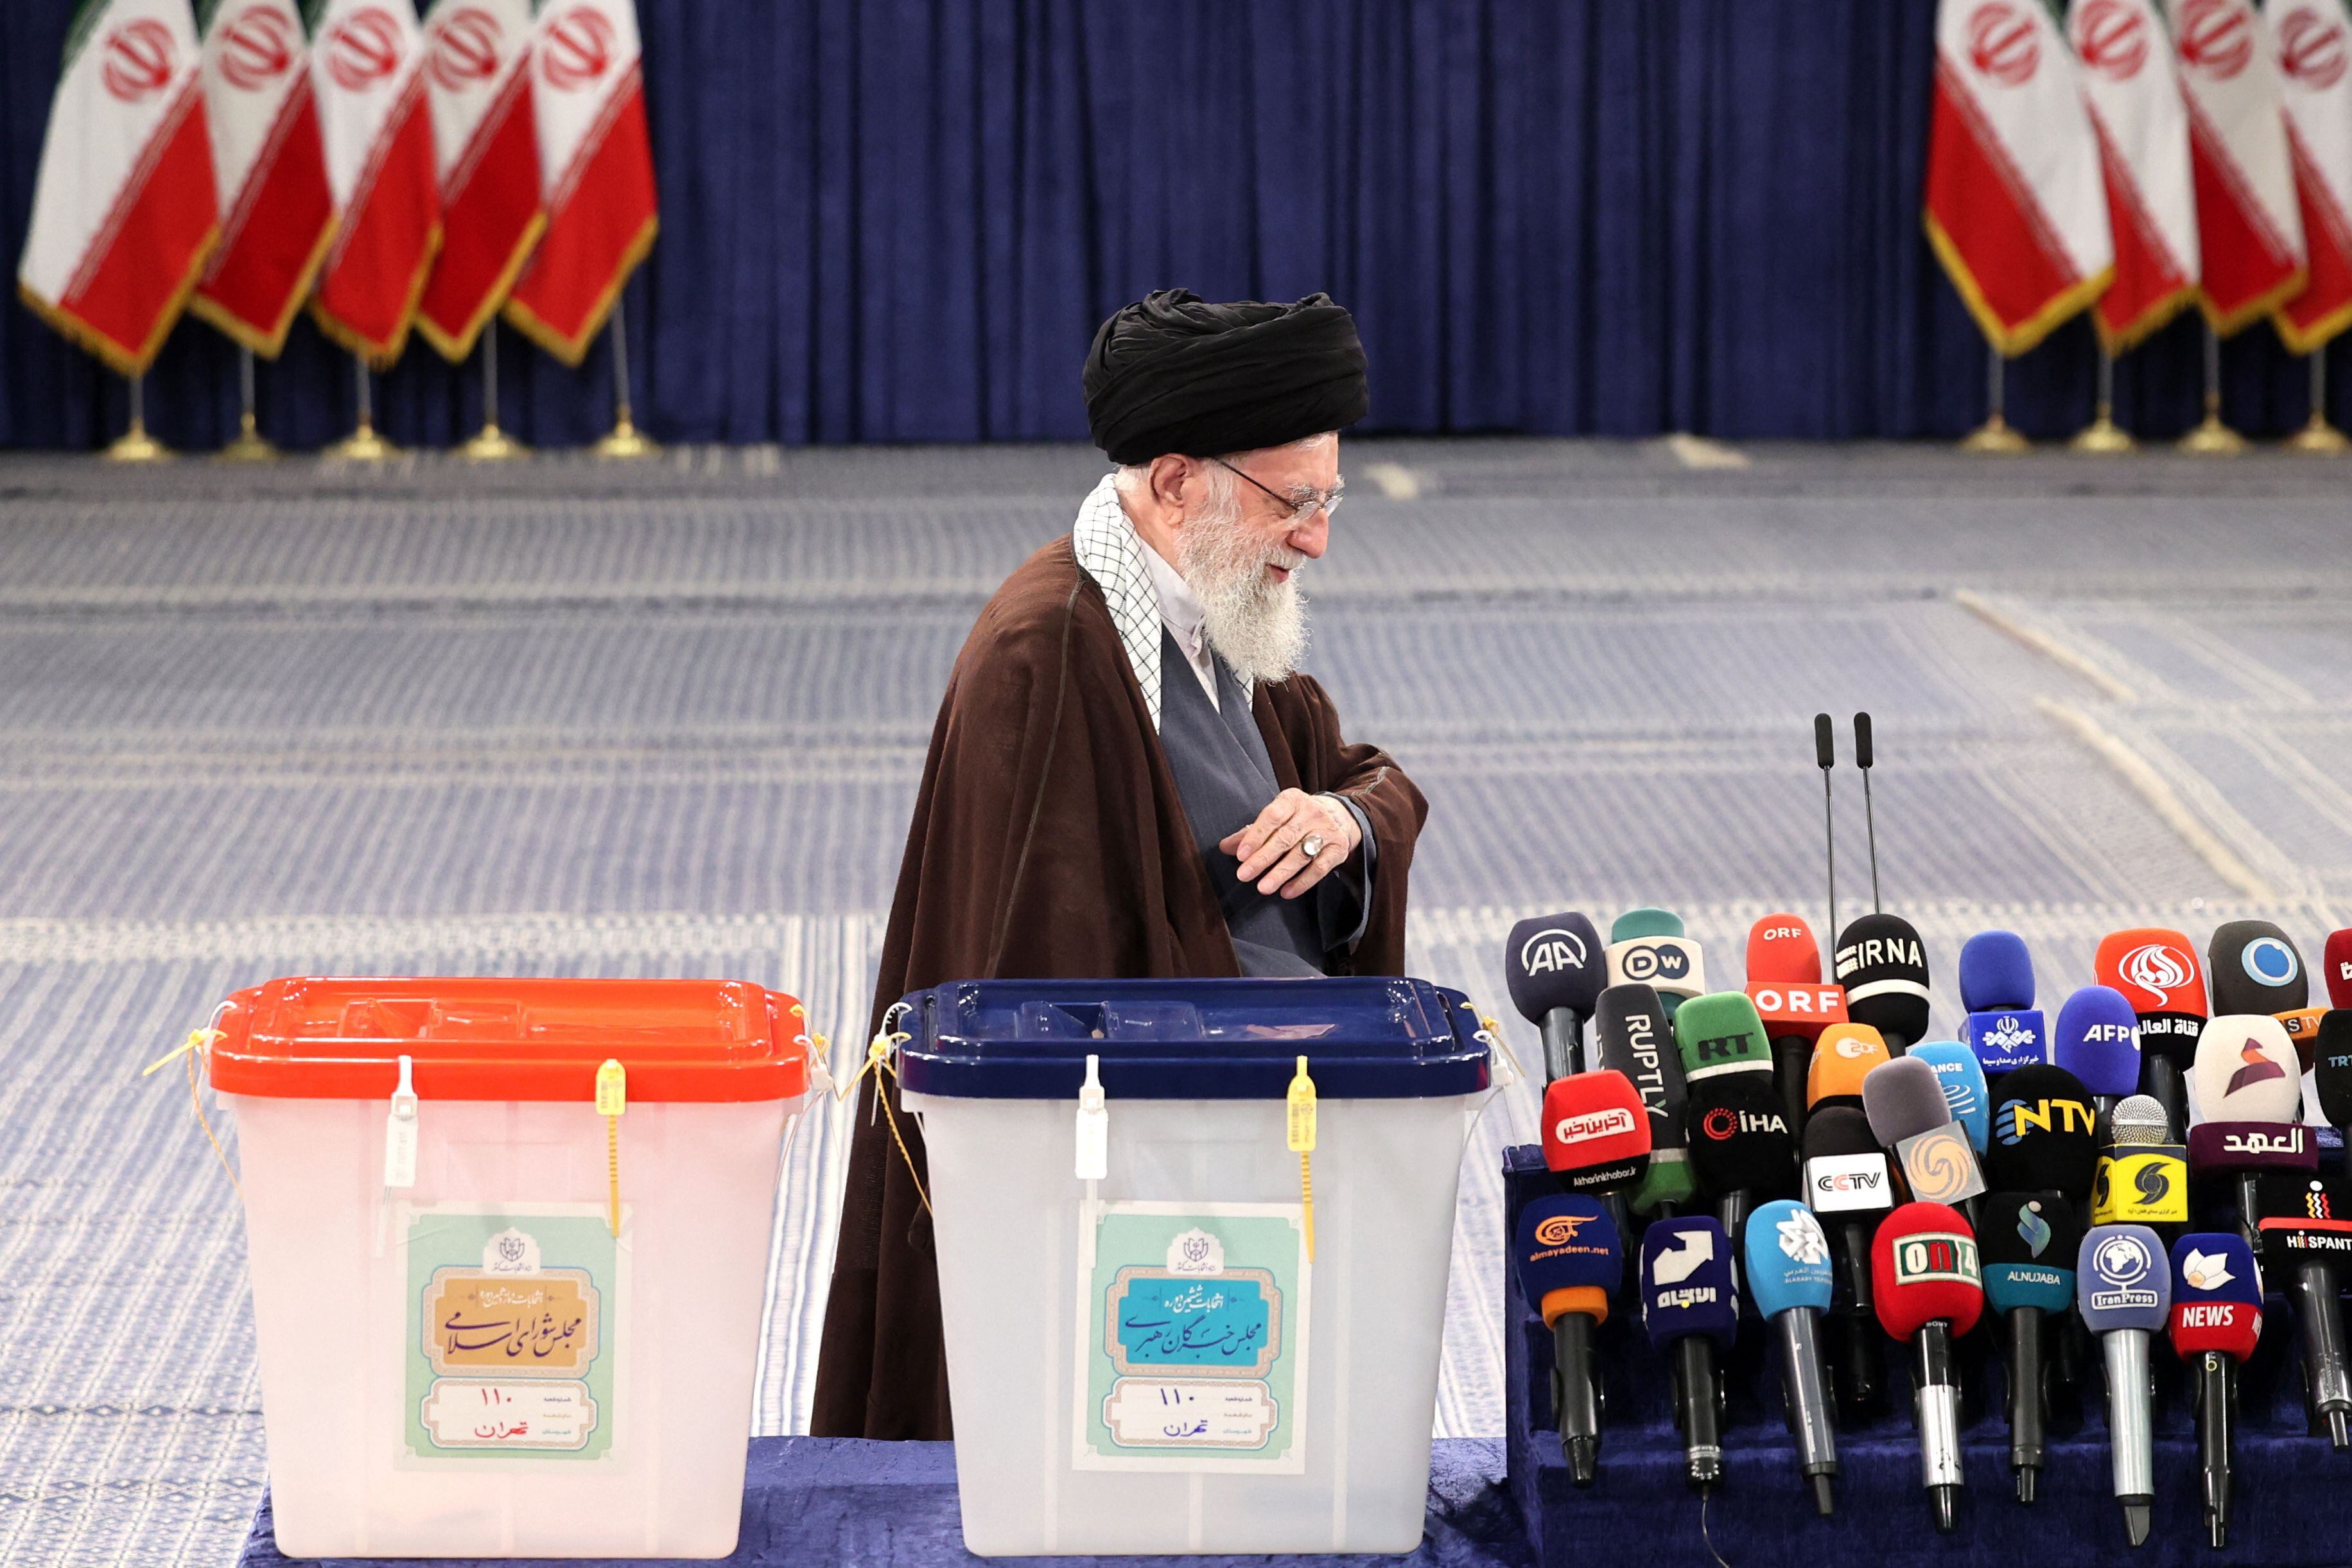 polls open in iran parliament elections amid predictions of low turnout